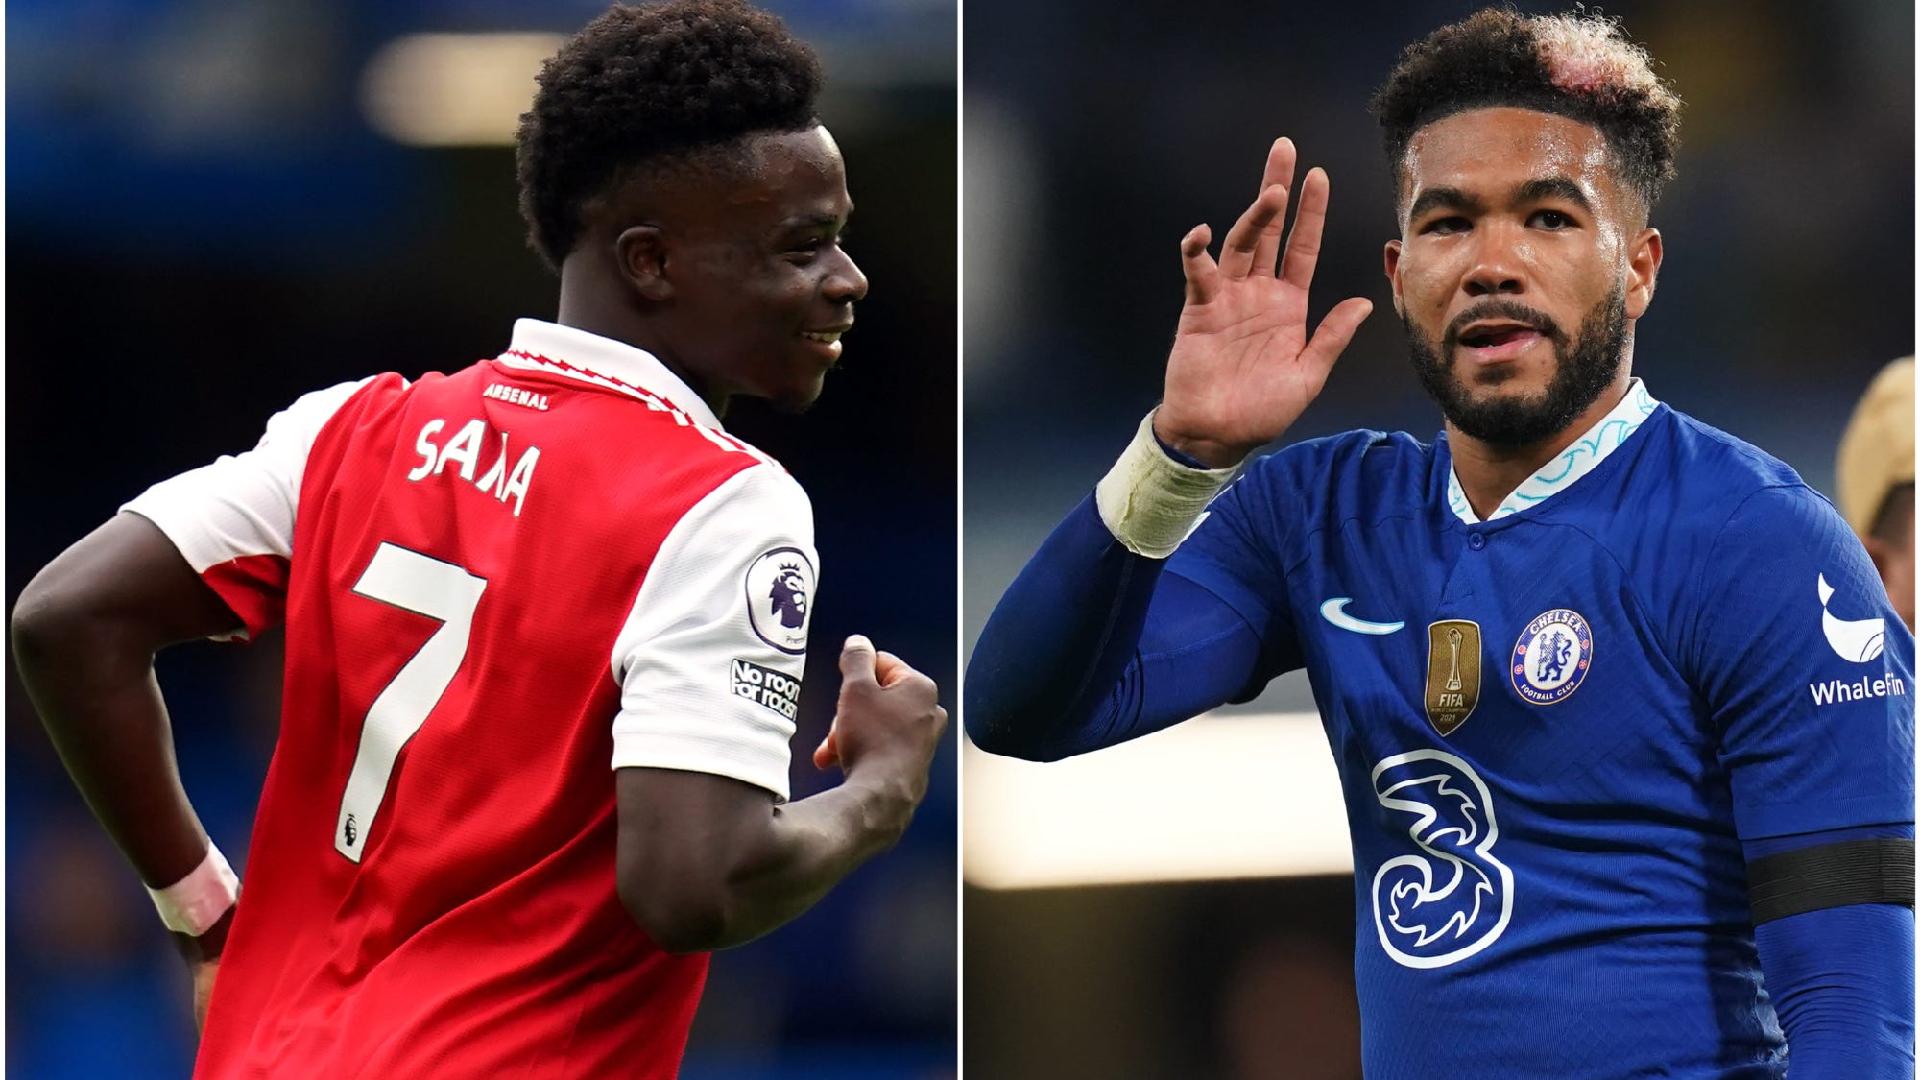 Academy study shows Chelsea and Arsenal produce most Premier League players beIN SPORTS